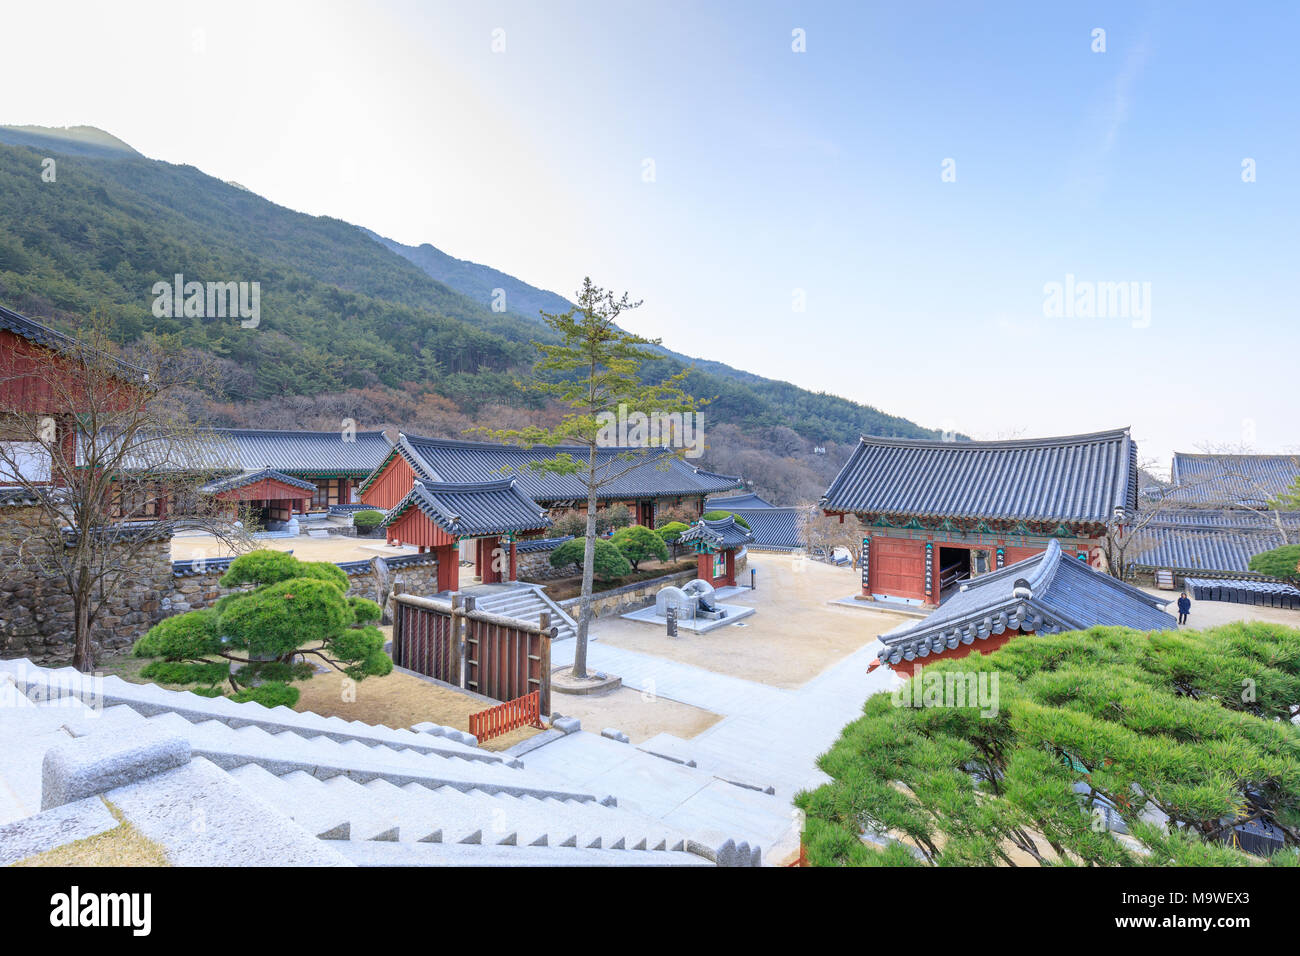 Gurye, South Korea - March 26, 2018 : Scenery of Hwaeomsa Temple, which is the ancient Korean buddhist temple in Jirisan National Park Stock Photo